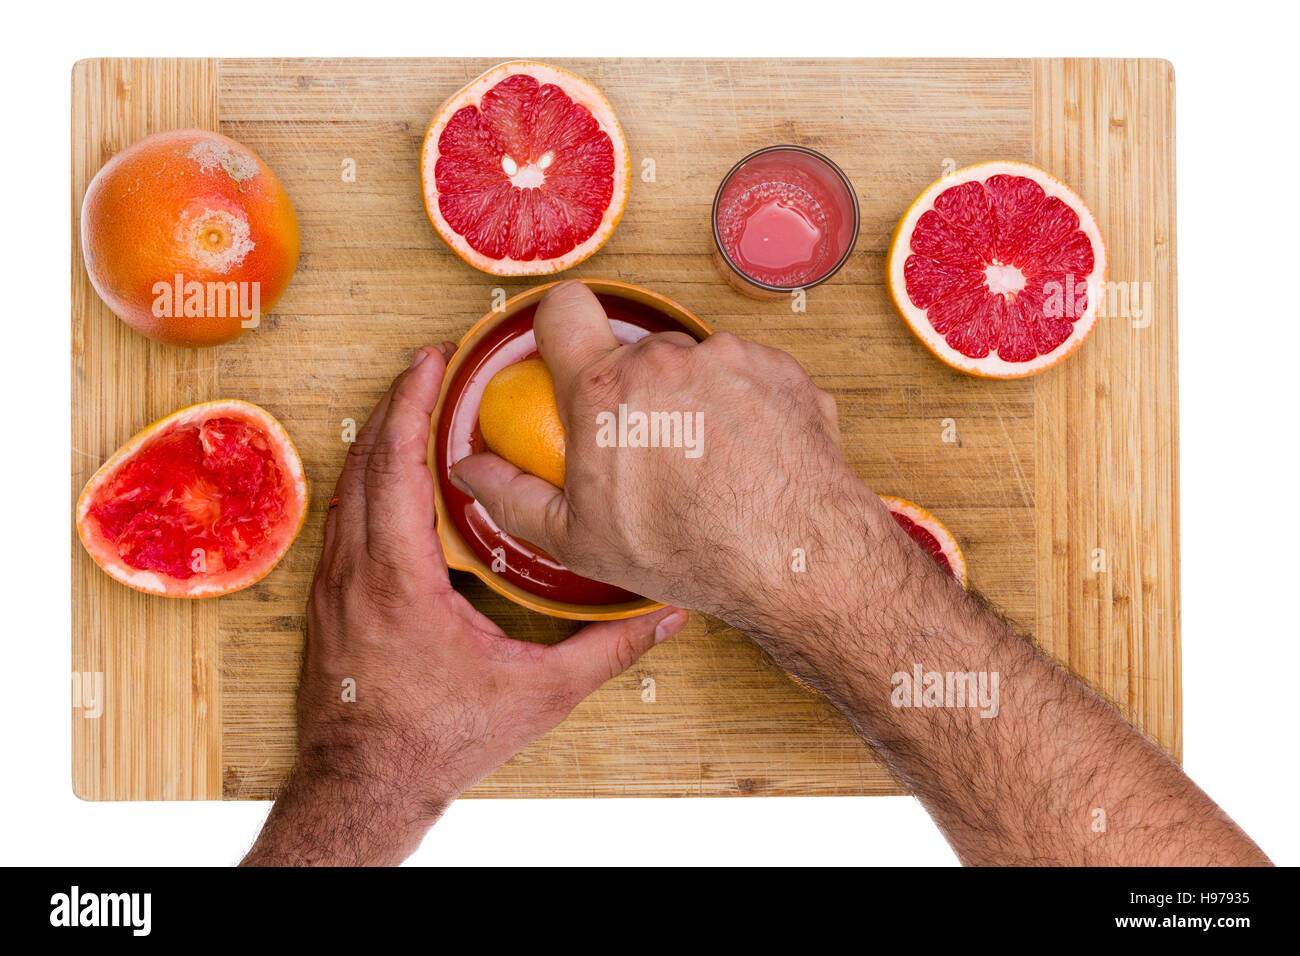 Man squeezing cut fresh ruby grapefruit halves on a manual juicer with a glass of fresh juice rich in pectin soluble fiber alongside, overhead view of Stock Photo